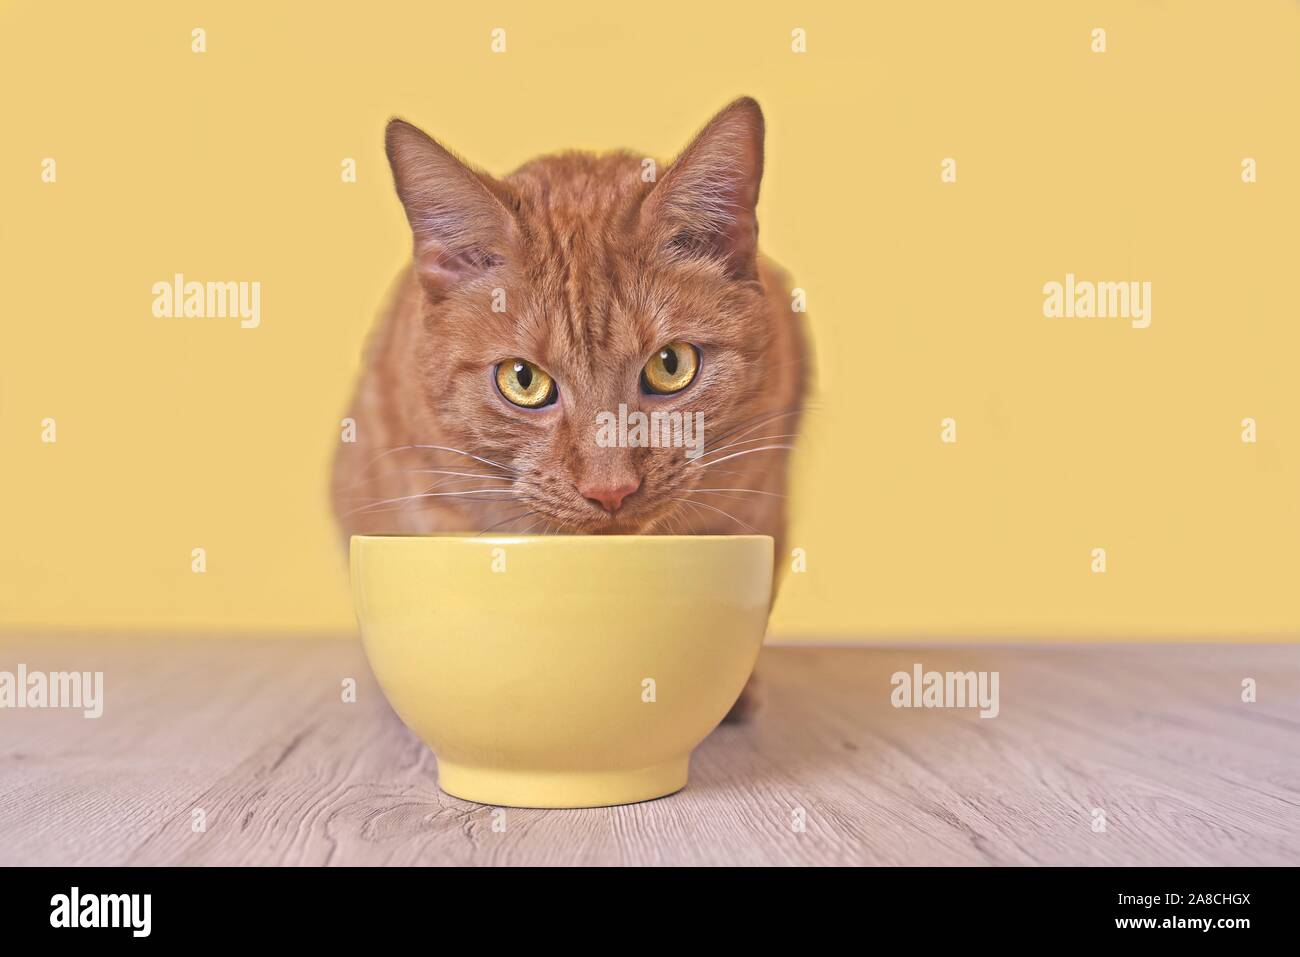 Ginger cat beside a yellow food bowl looking up and waiting for Food. Stock Photo